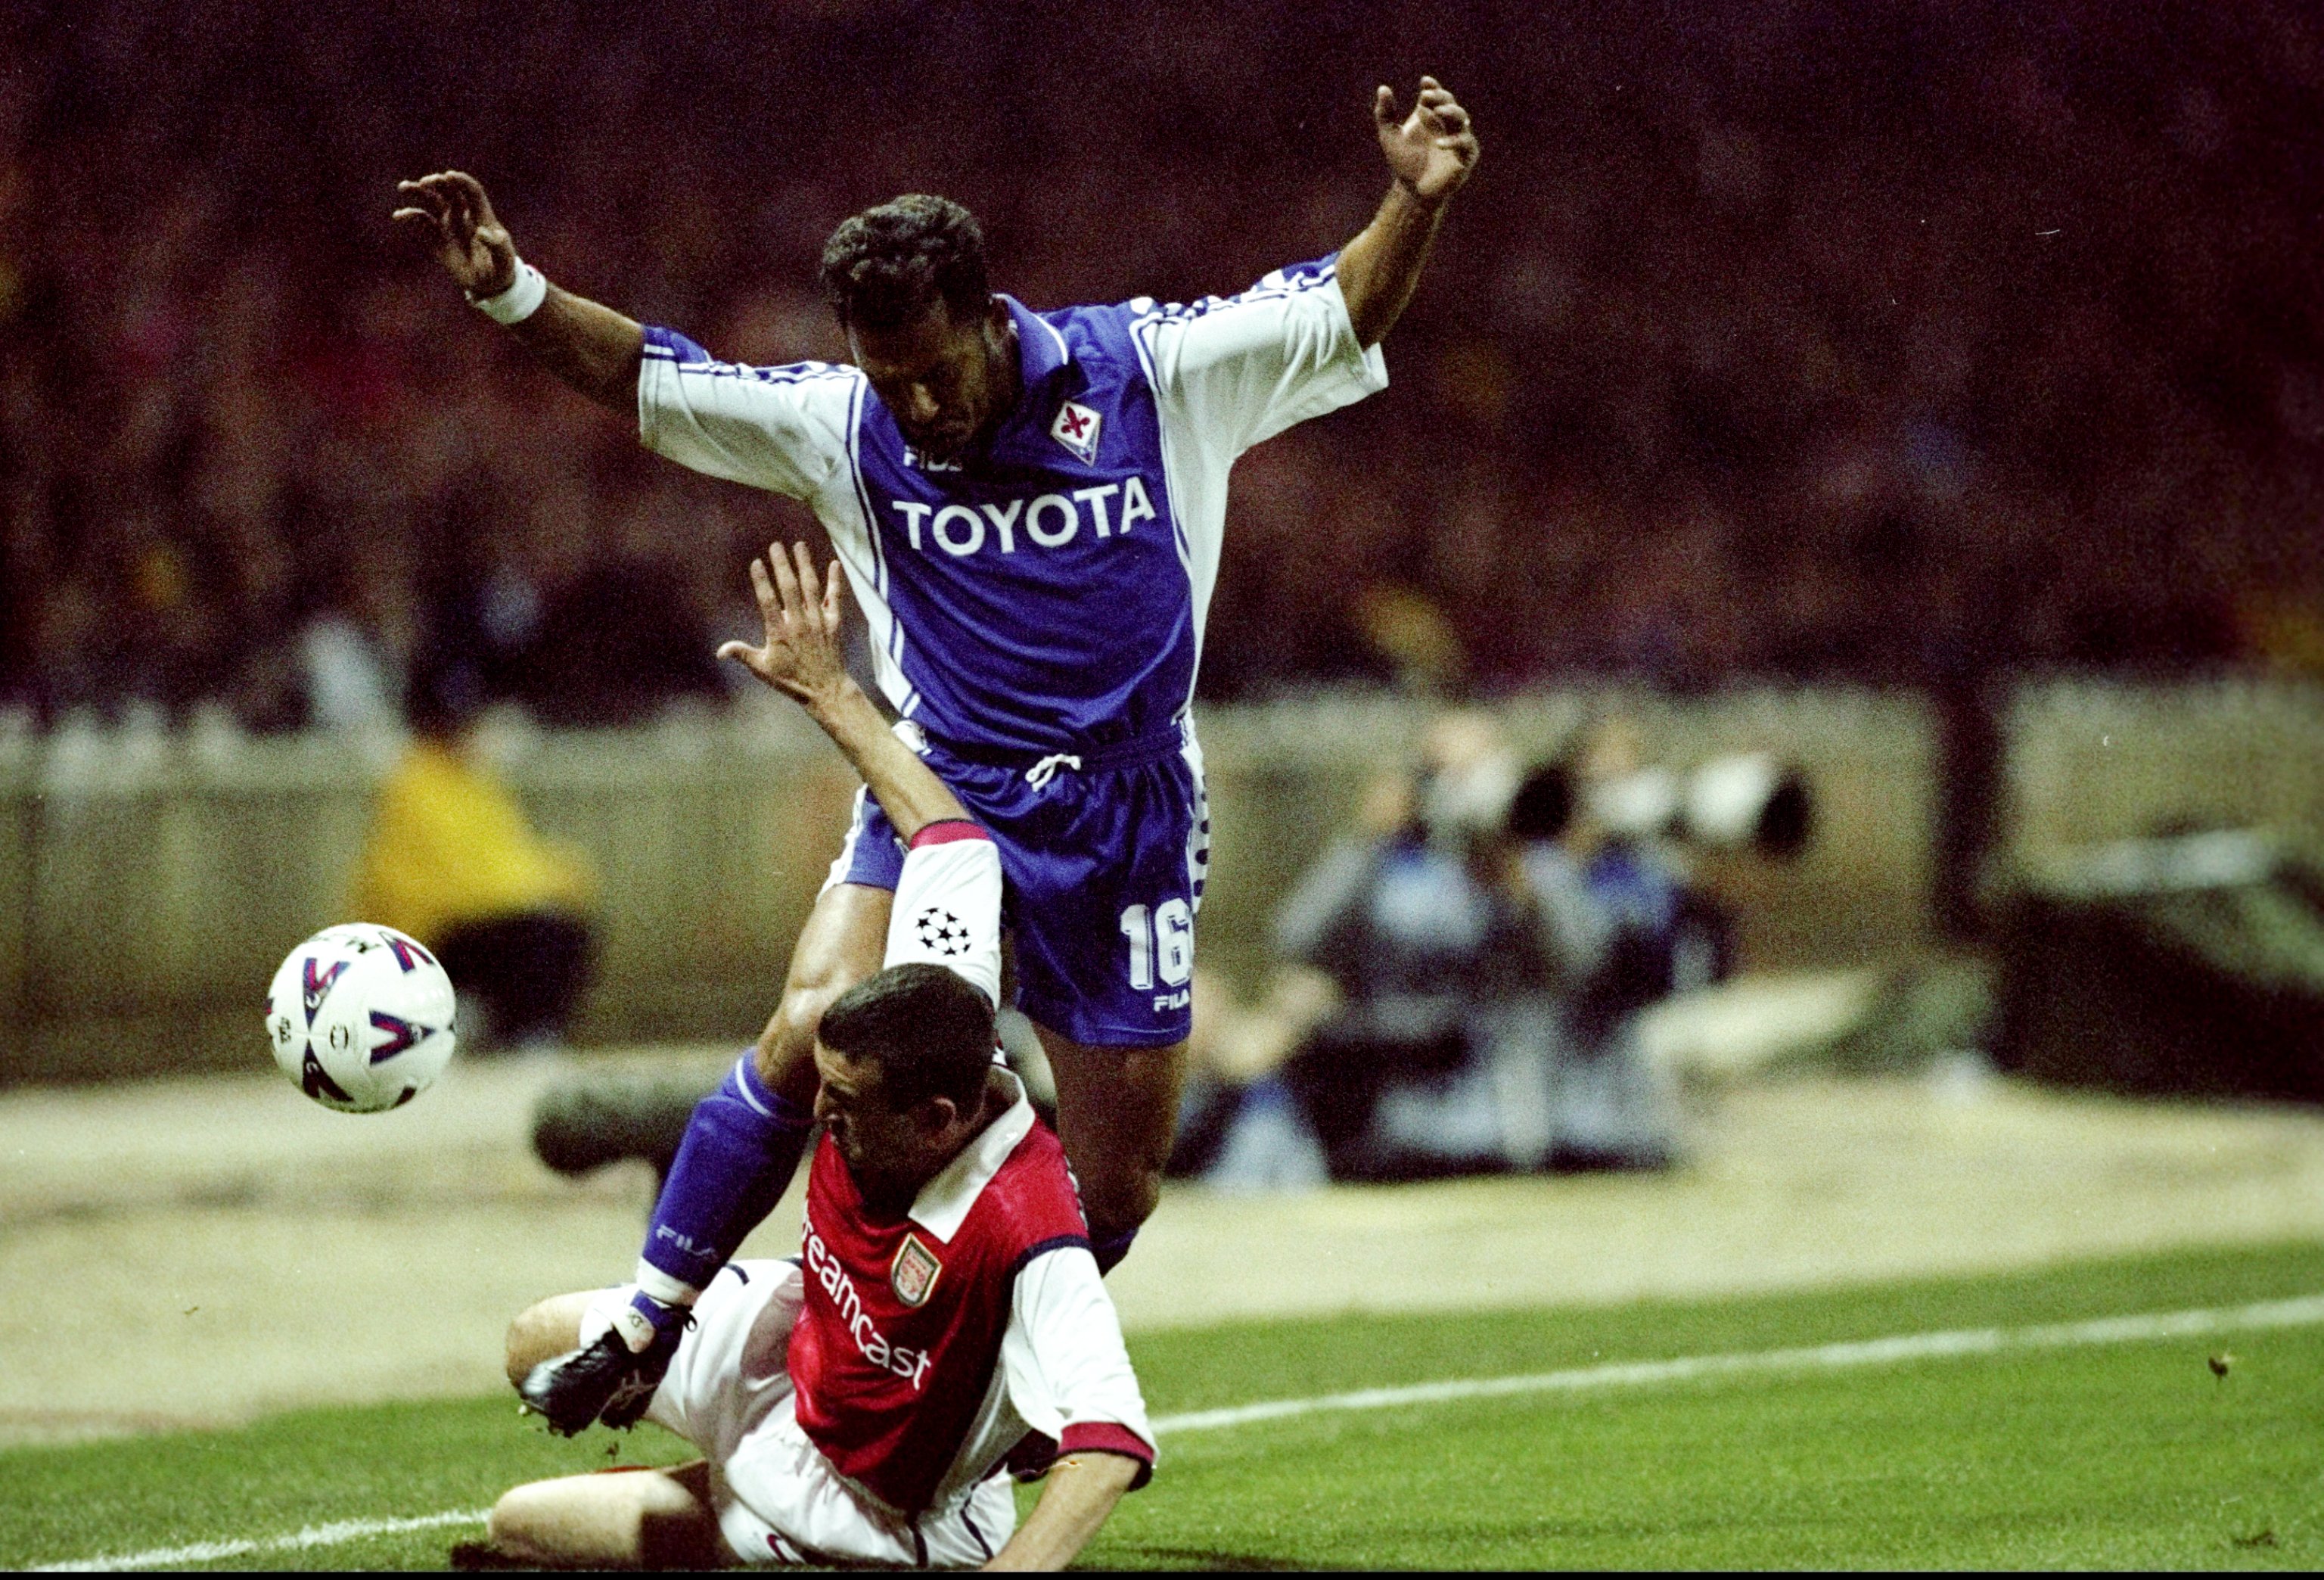 Fiorentina's Angelo Di Livio is tackled by Arsenal's Nigel Winterburn in a Champions League clash at Wembley in October 1999.